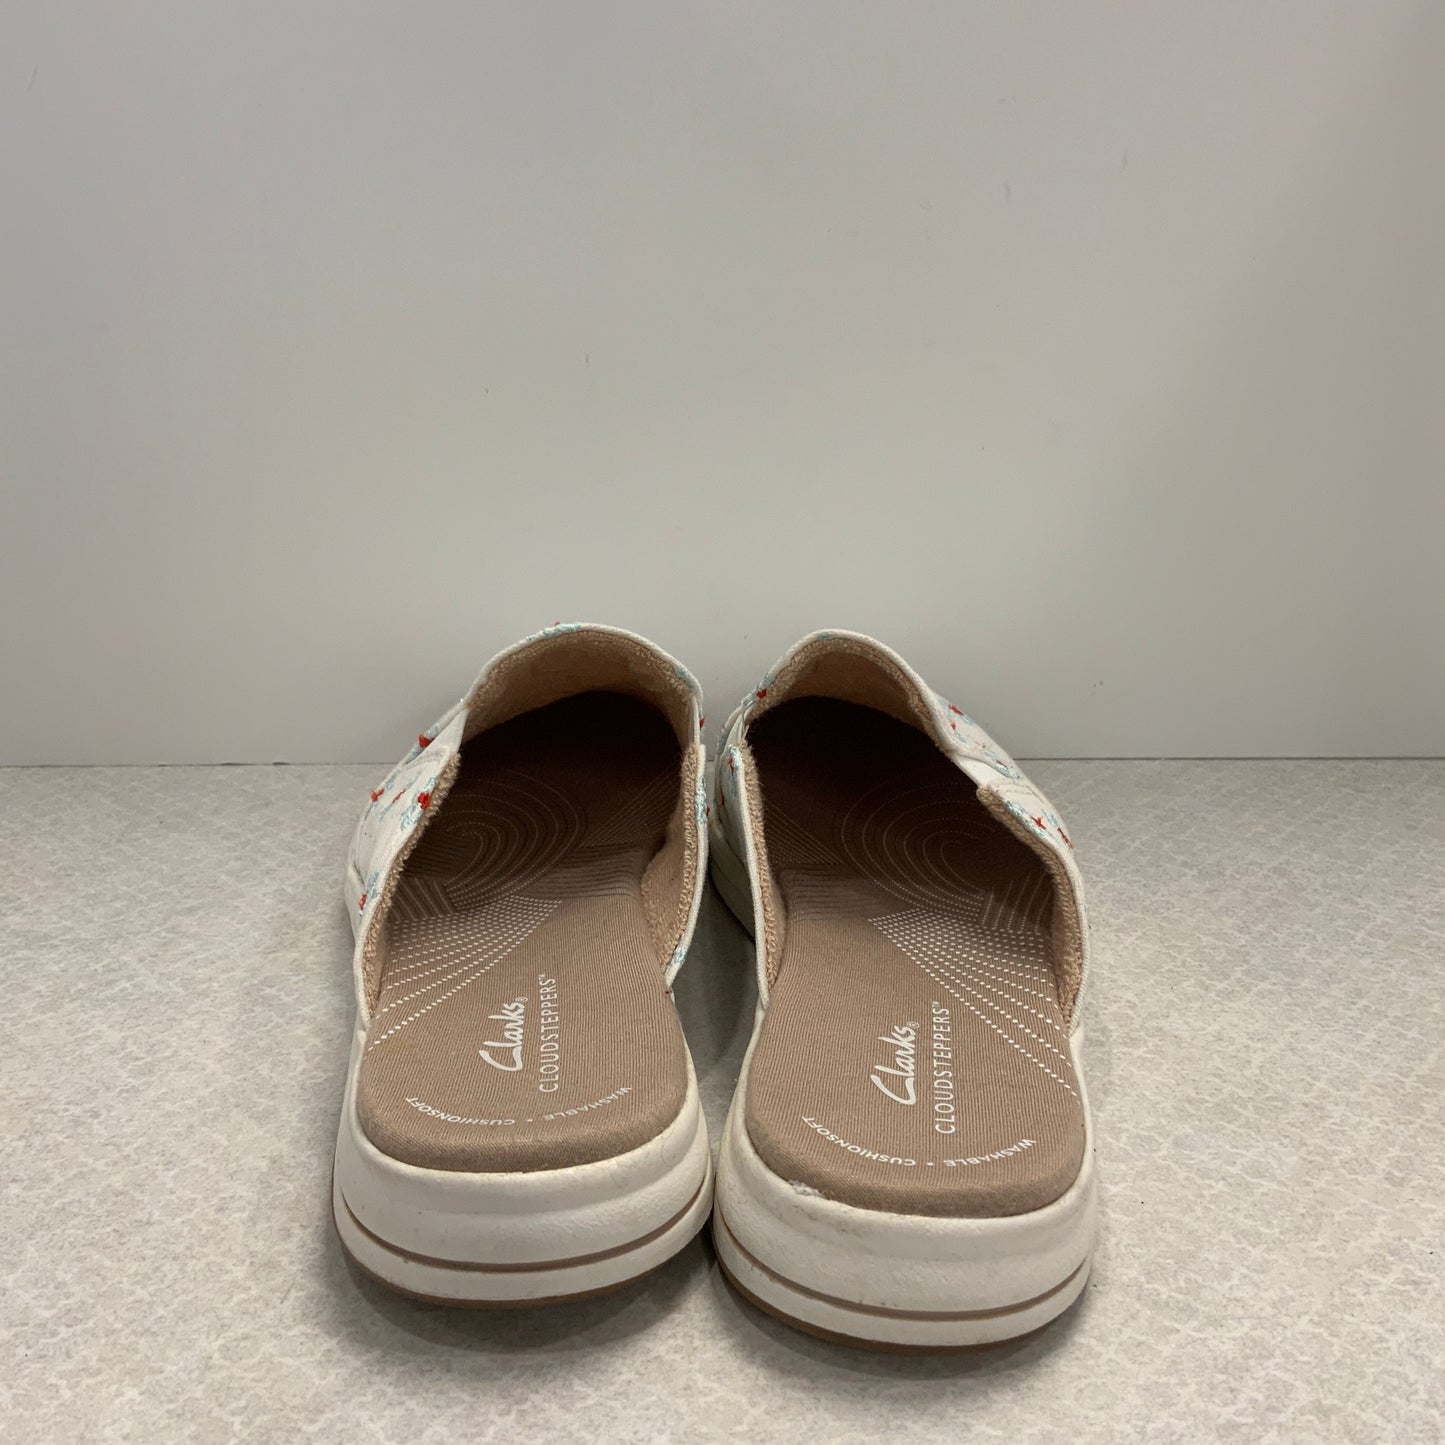 White Shoes Flats Clarks, Size 9